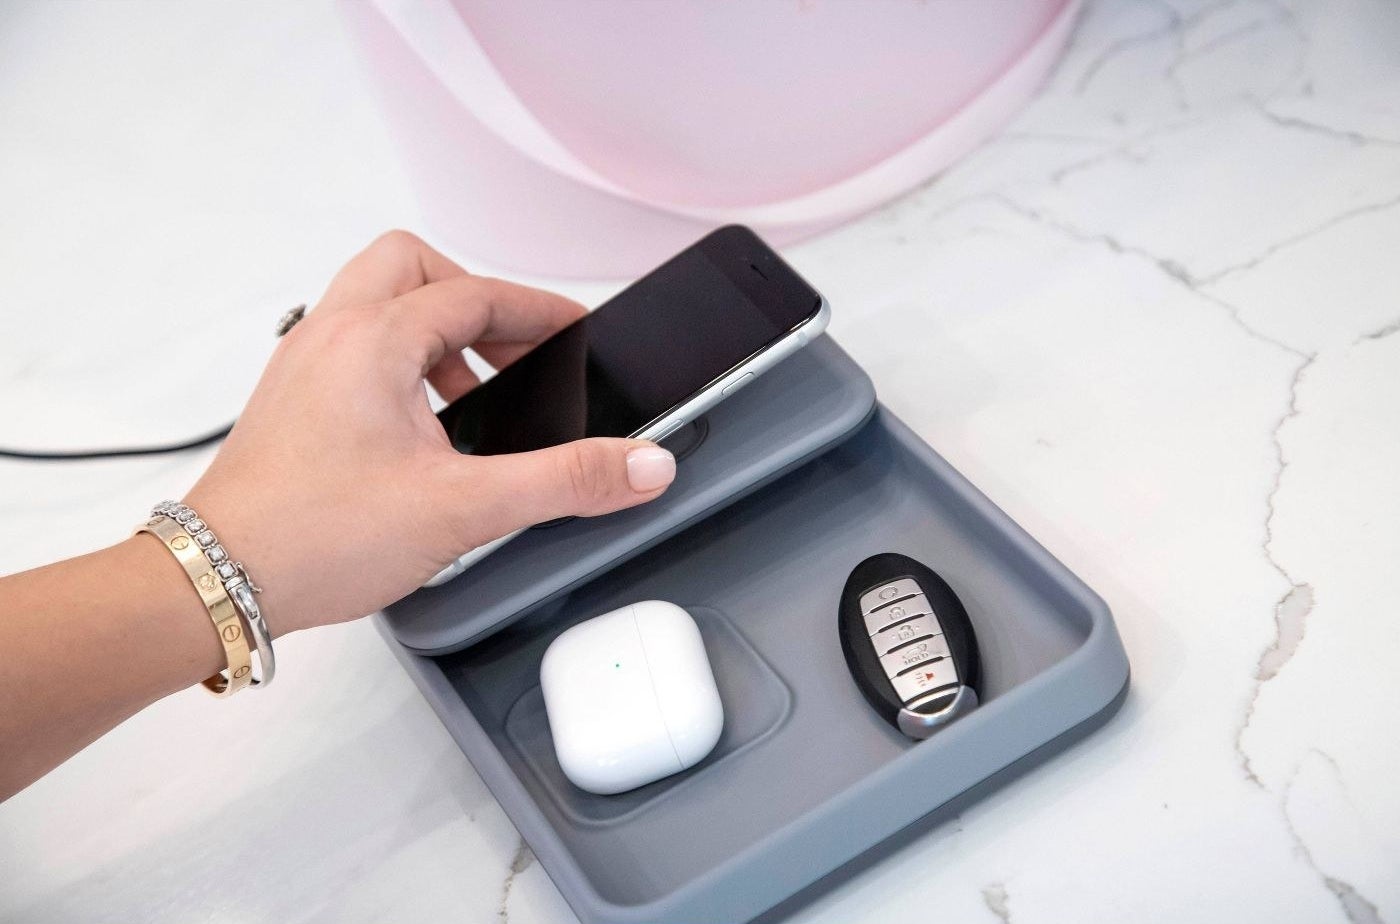 The wireless charger that&#x27;s charging a phone and airpods case